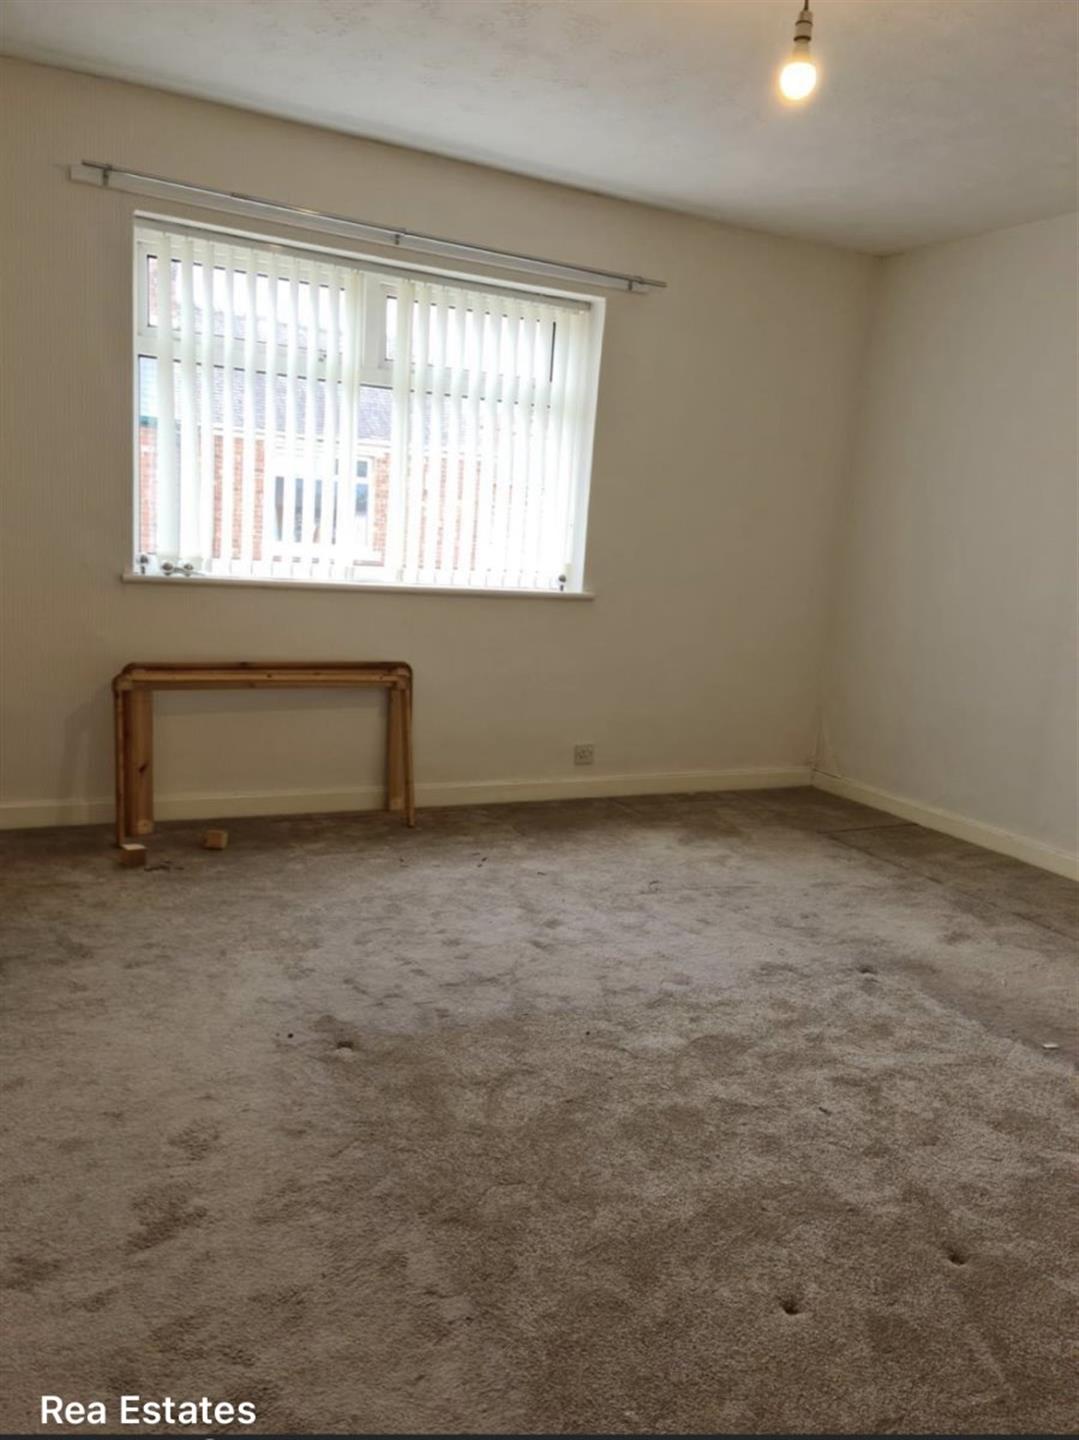 2 bedroom terraced house To Let in Saint Helens - photograph 10.